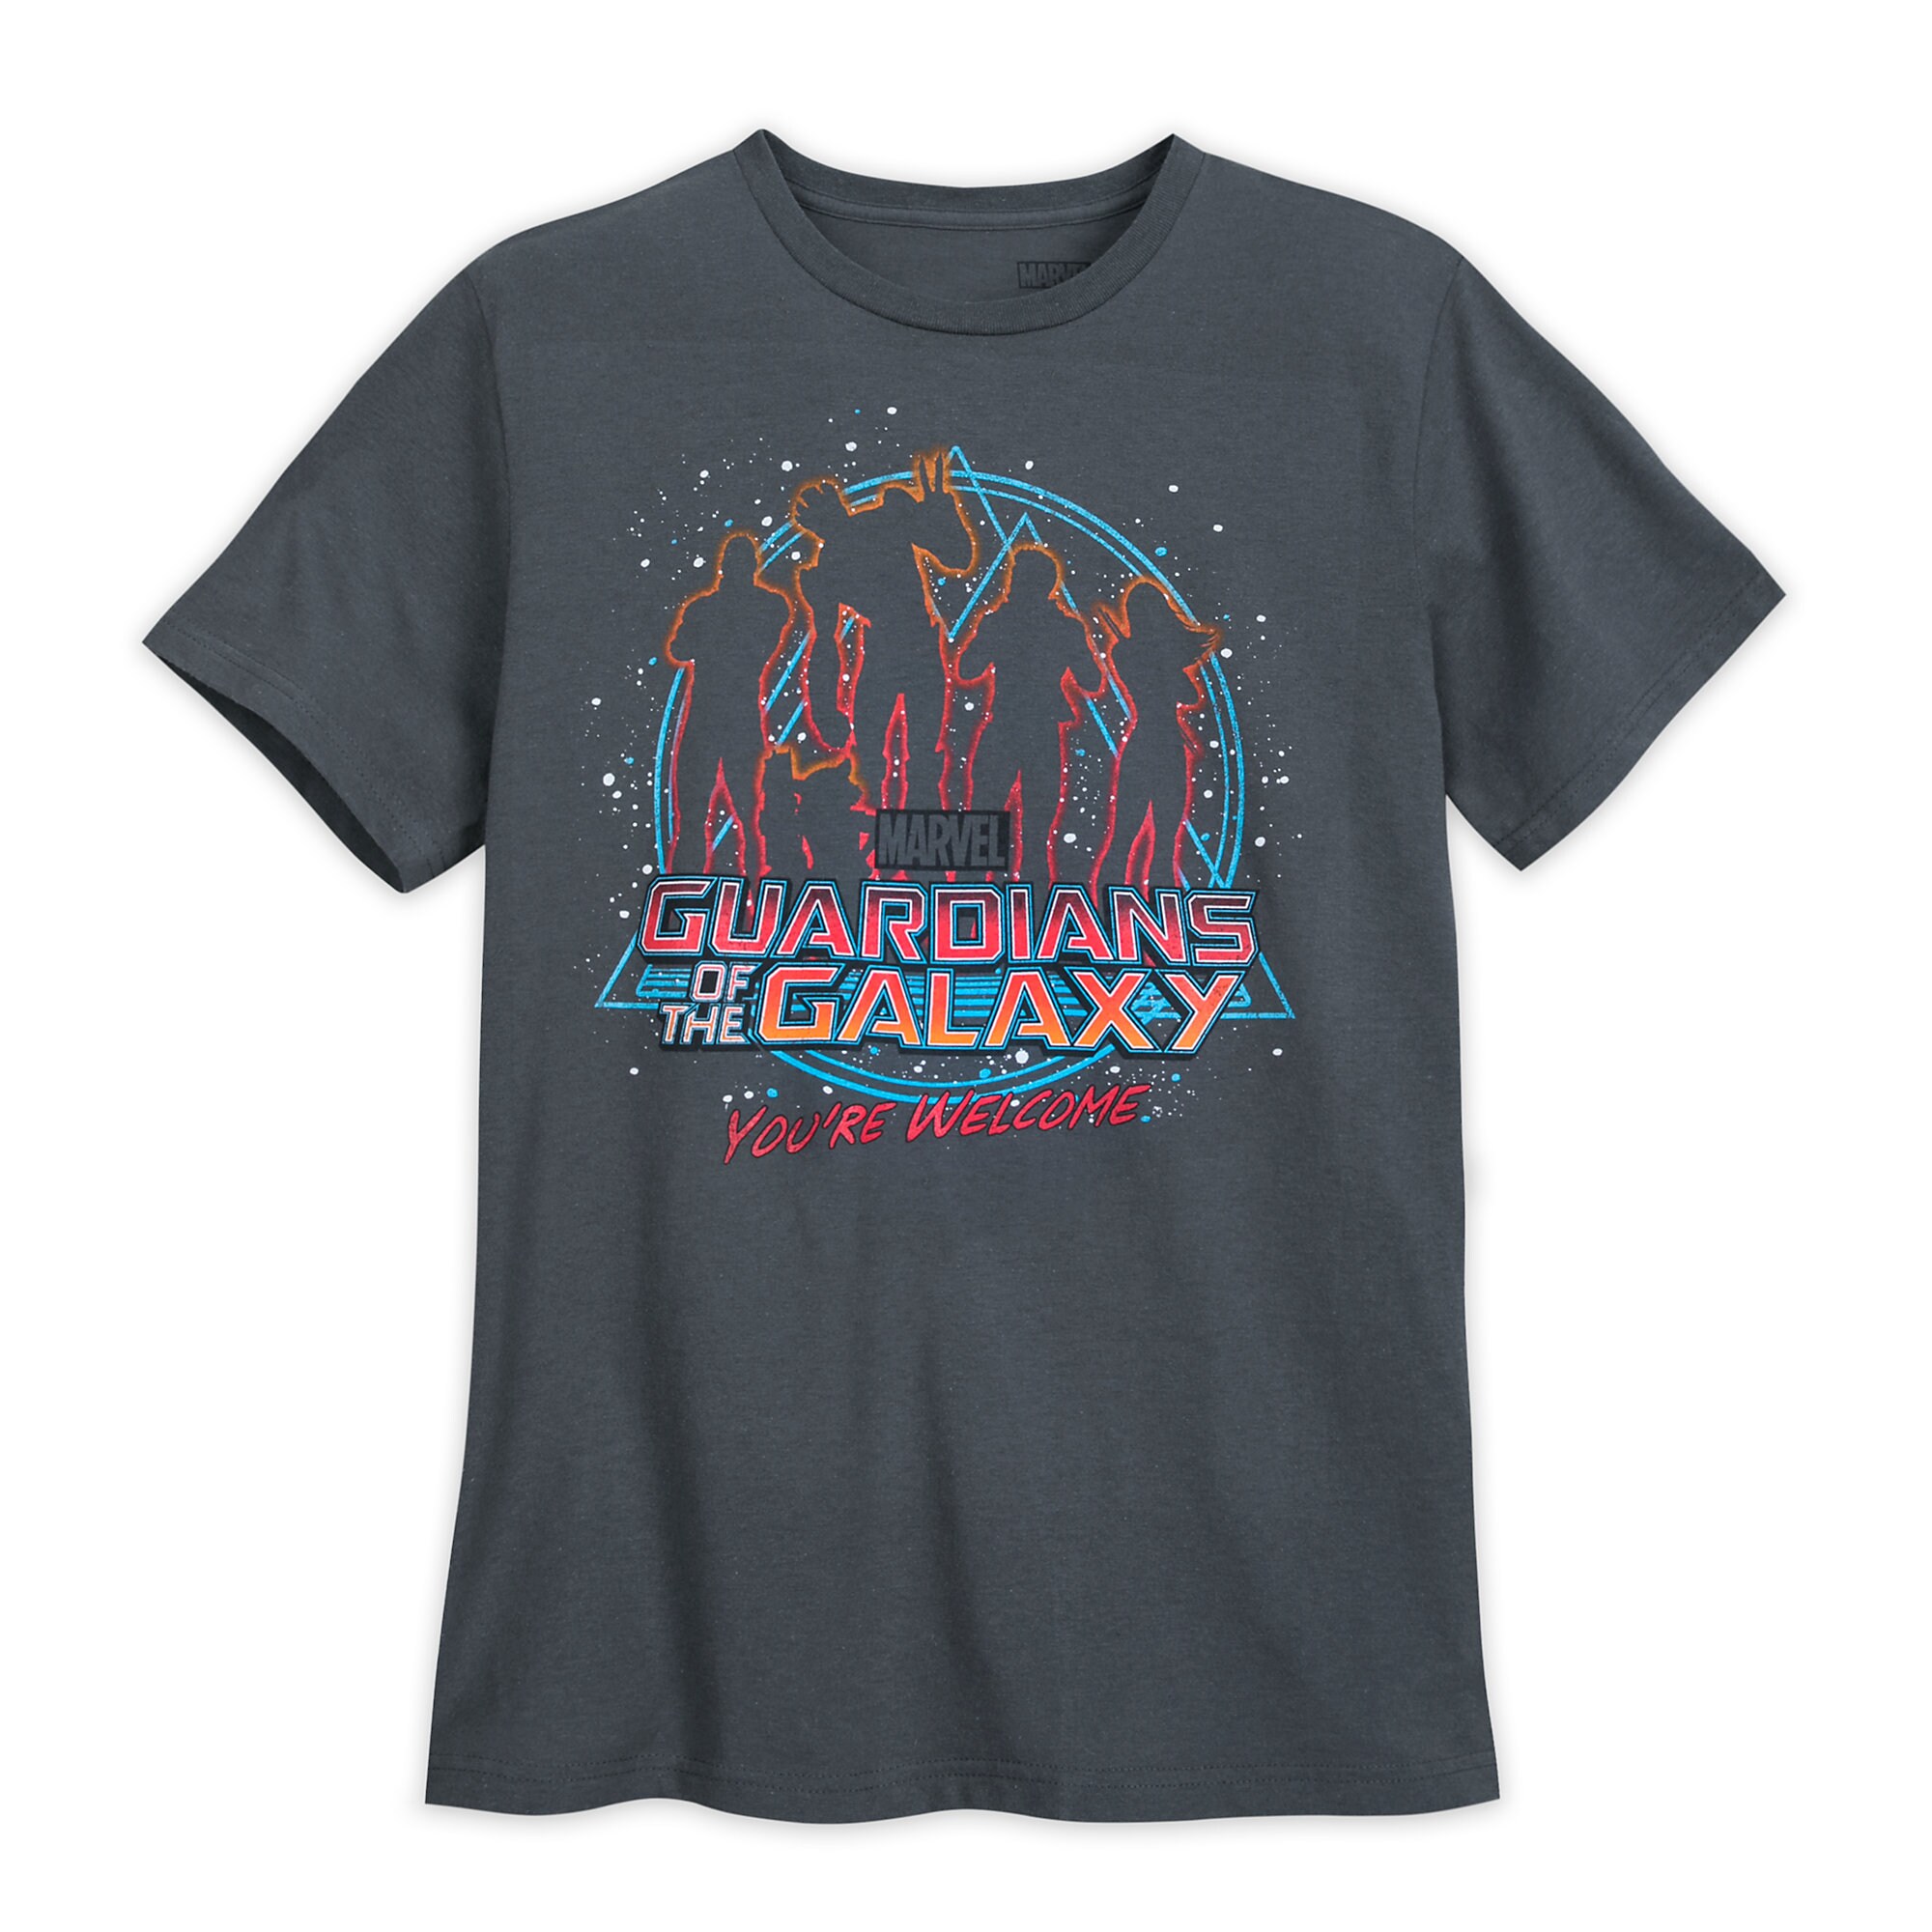 Guardians of the Galaxy Tee for Men